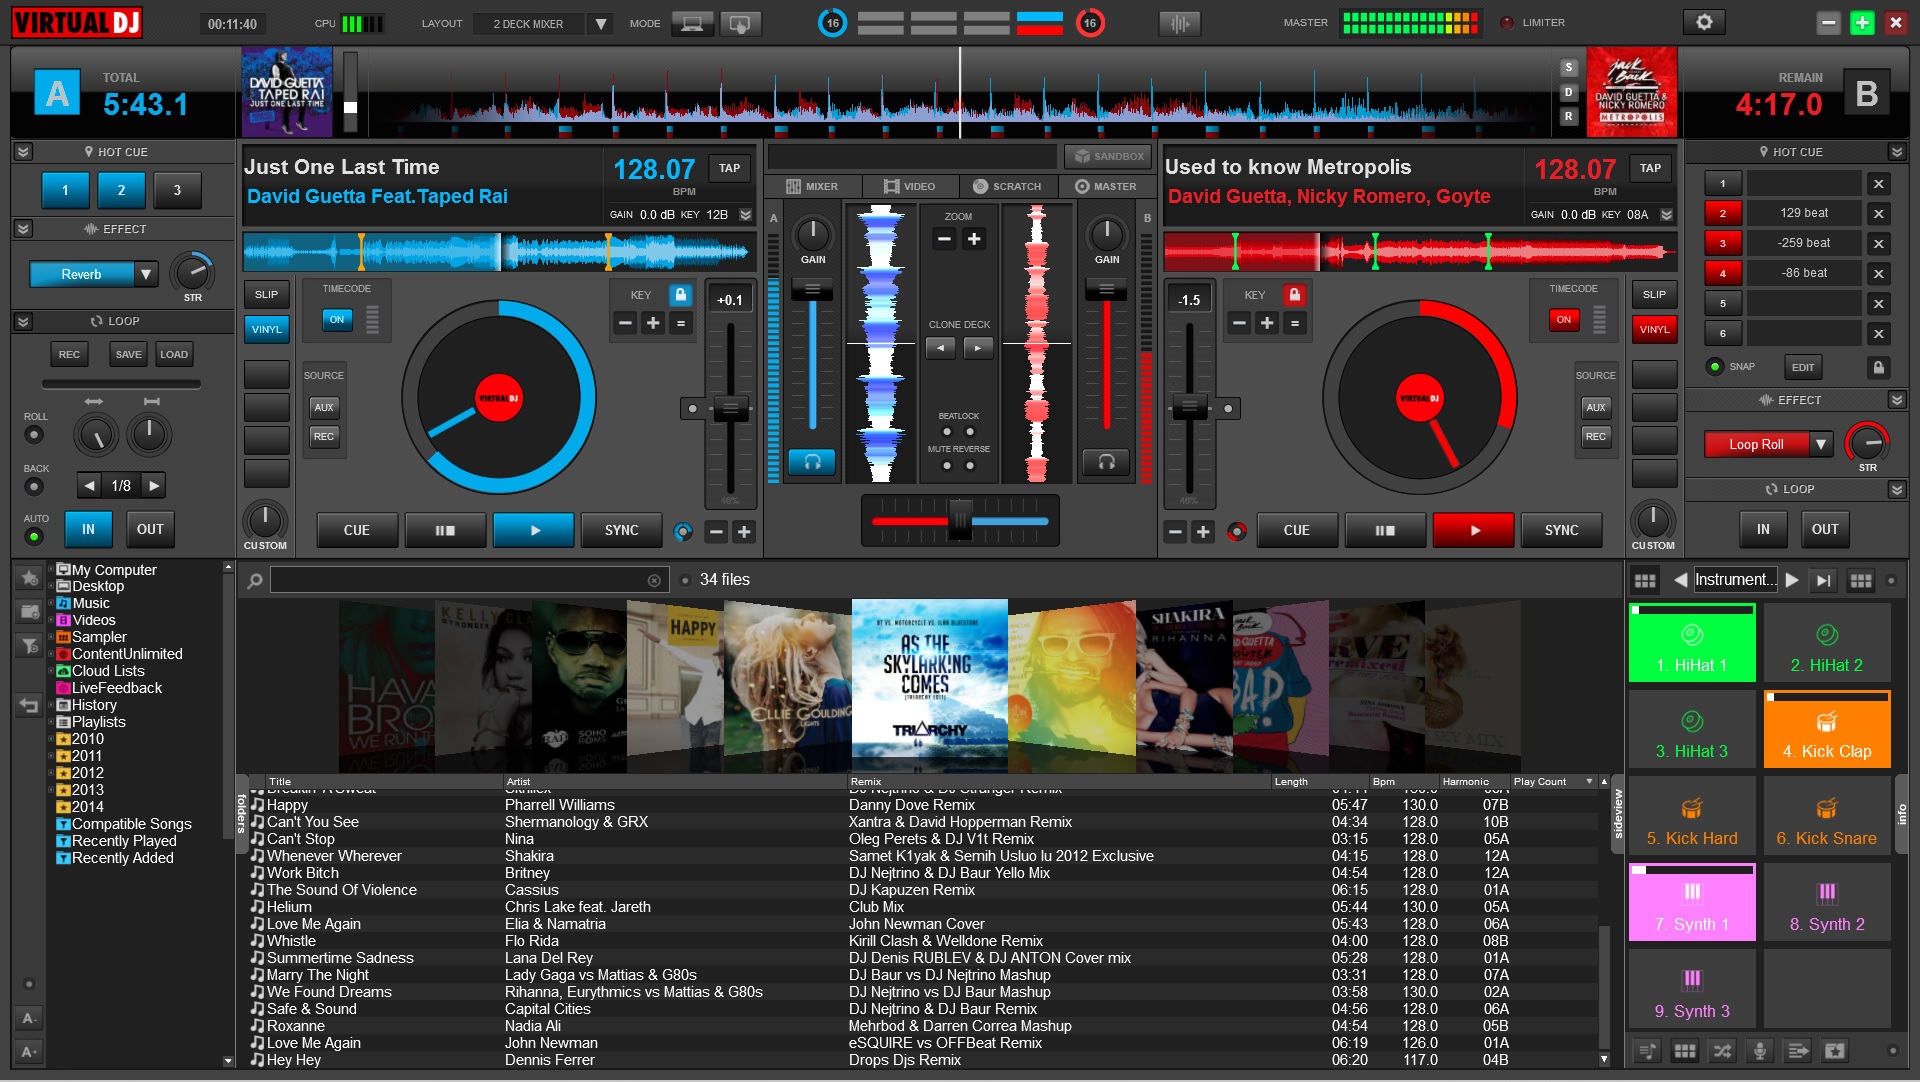 Virtual DJ Download - A professional tool for video and audio mixing and arranging